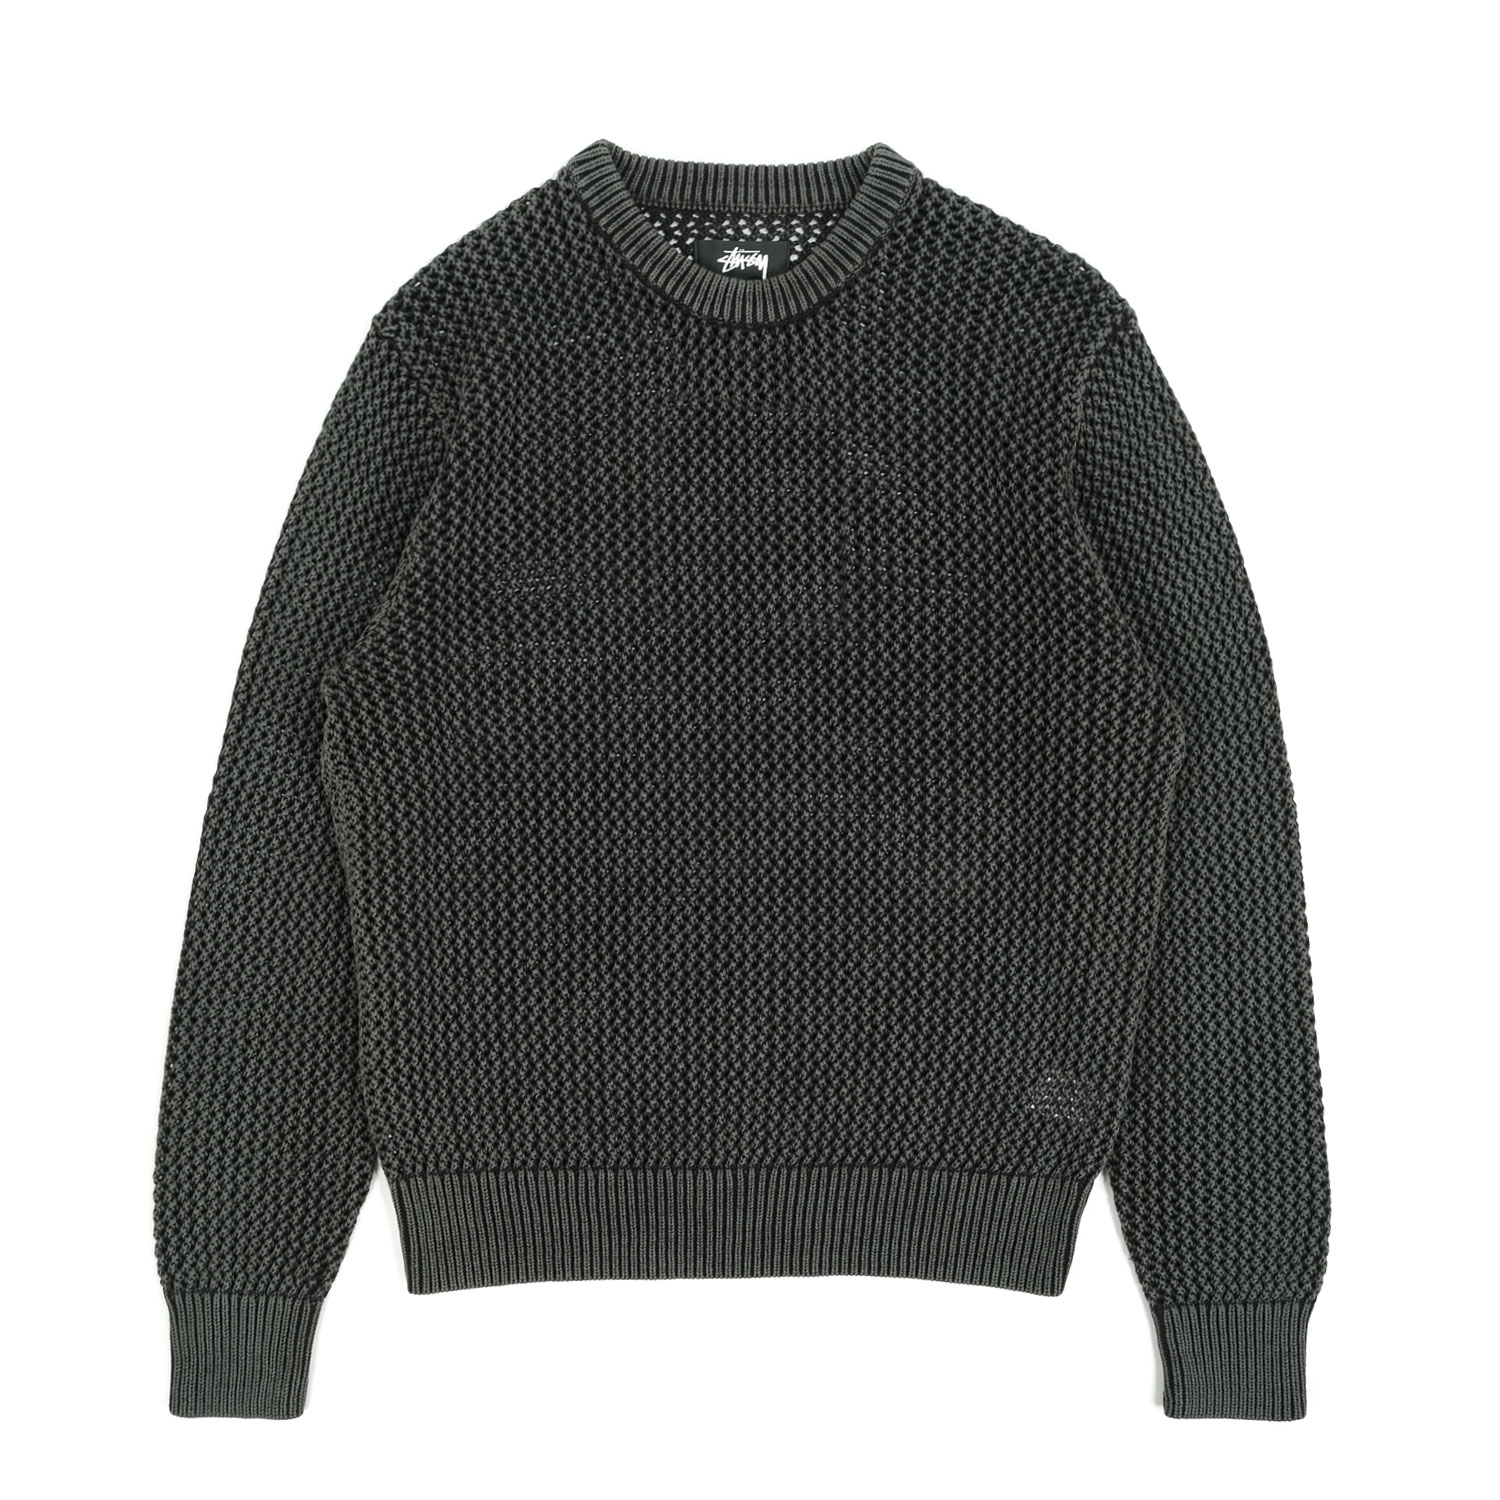 Stussy Pigment Dyed Loose Gauge Sweater | FIRMAMENT - Berlin 